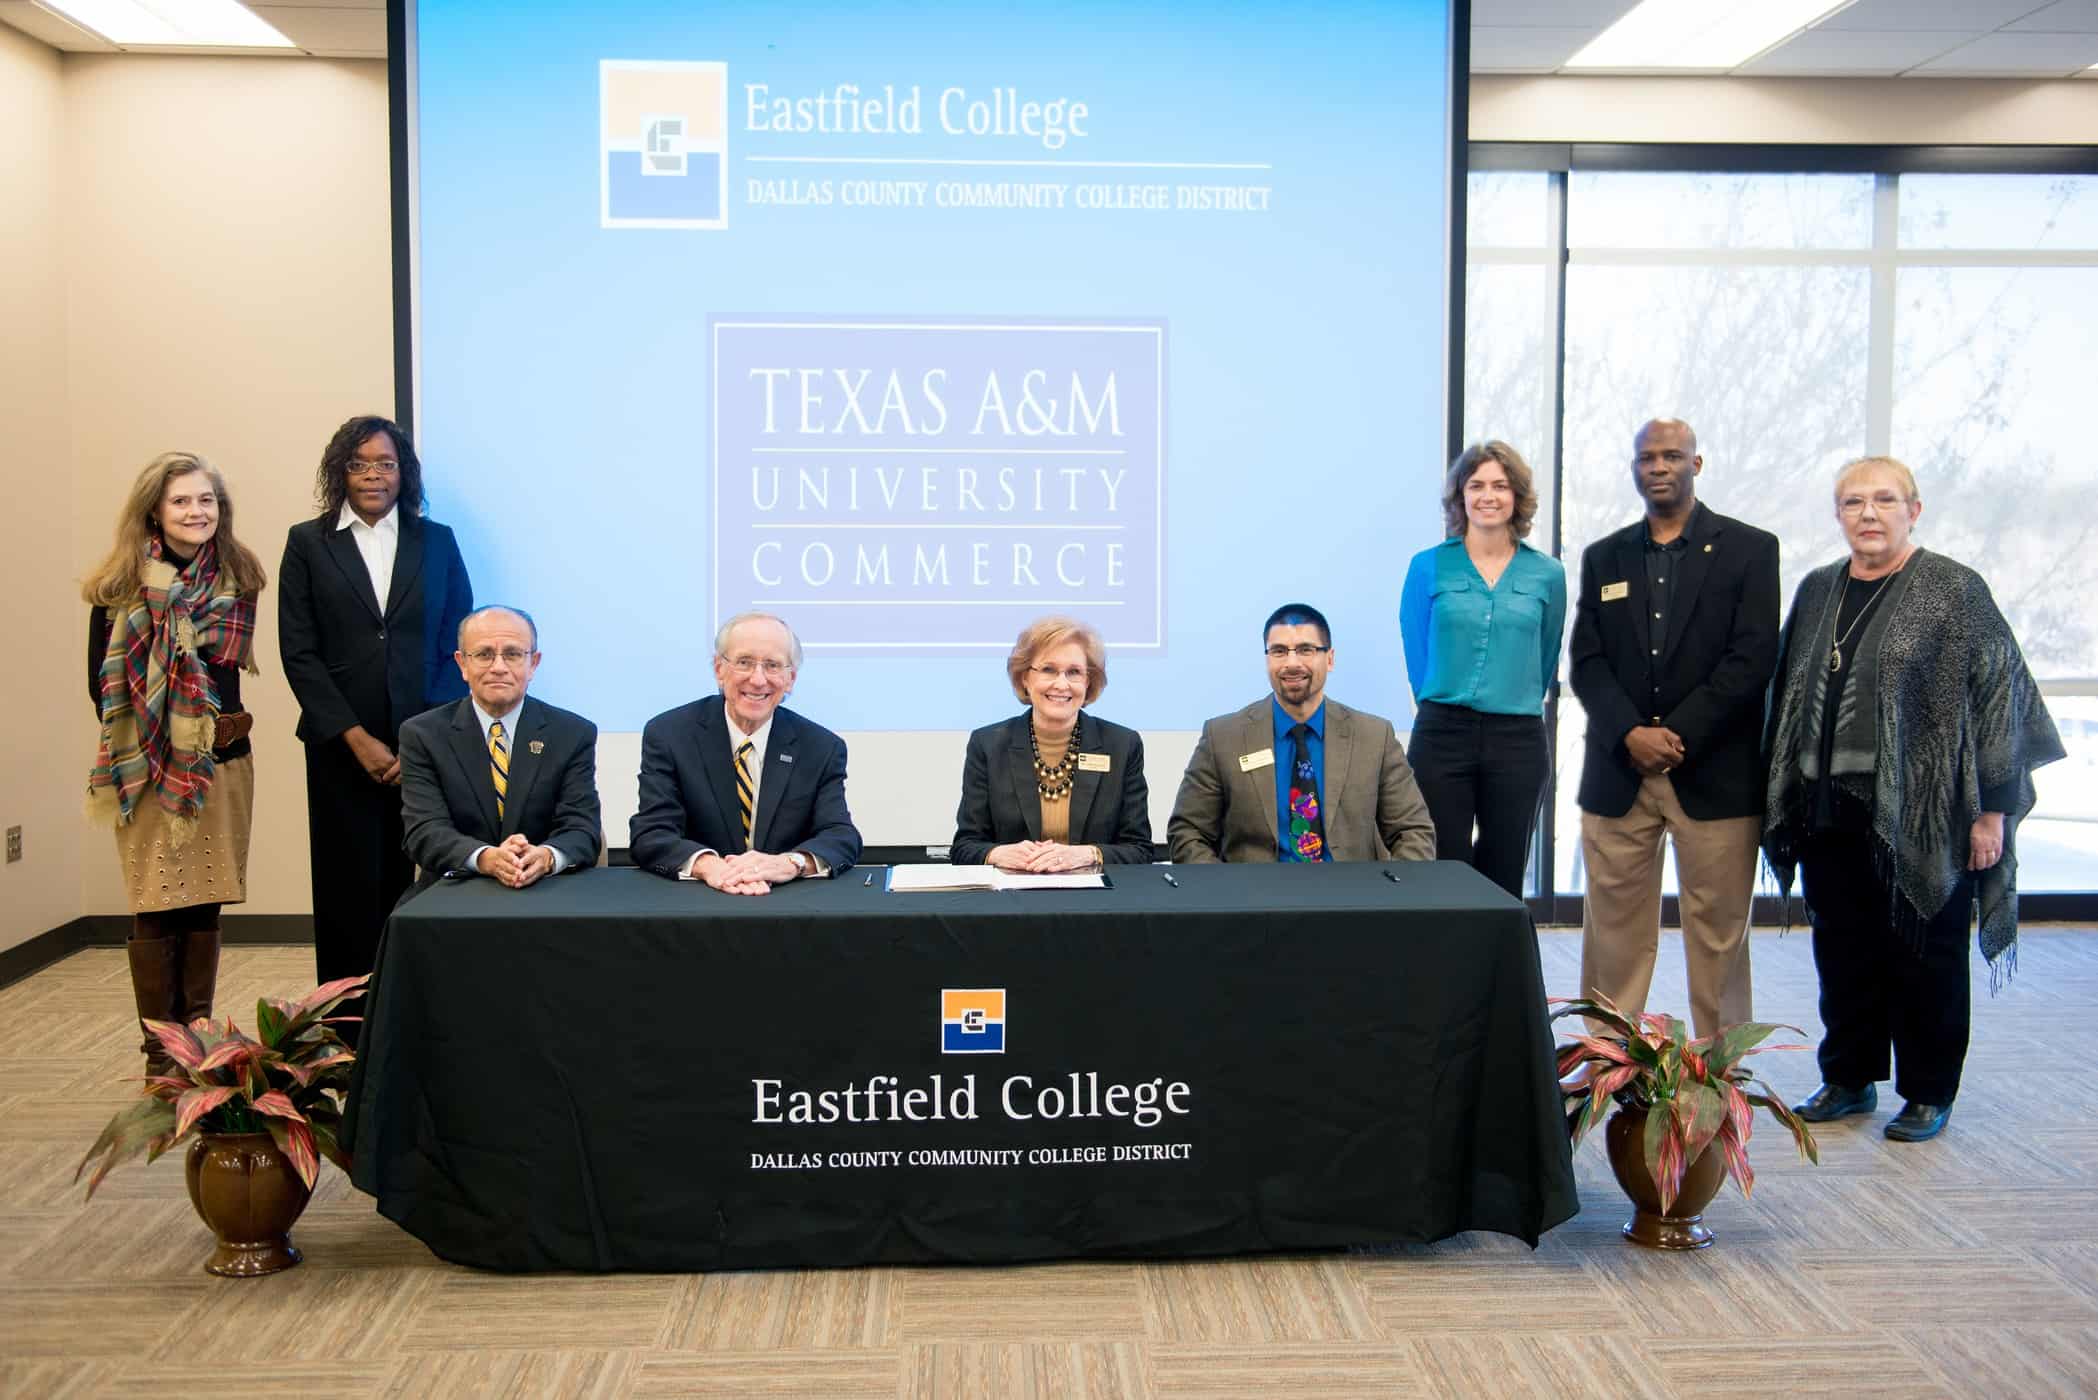 a group picture of Eastfield college members